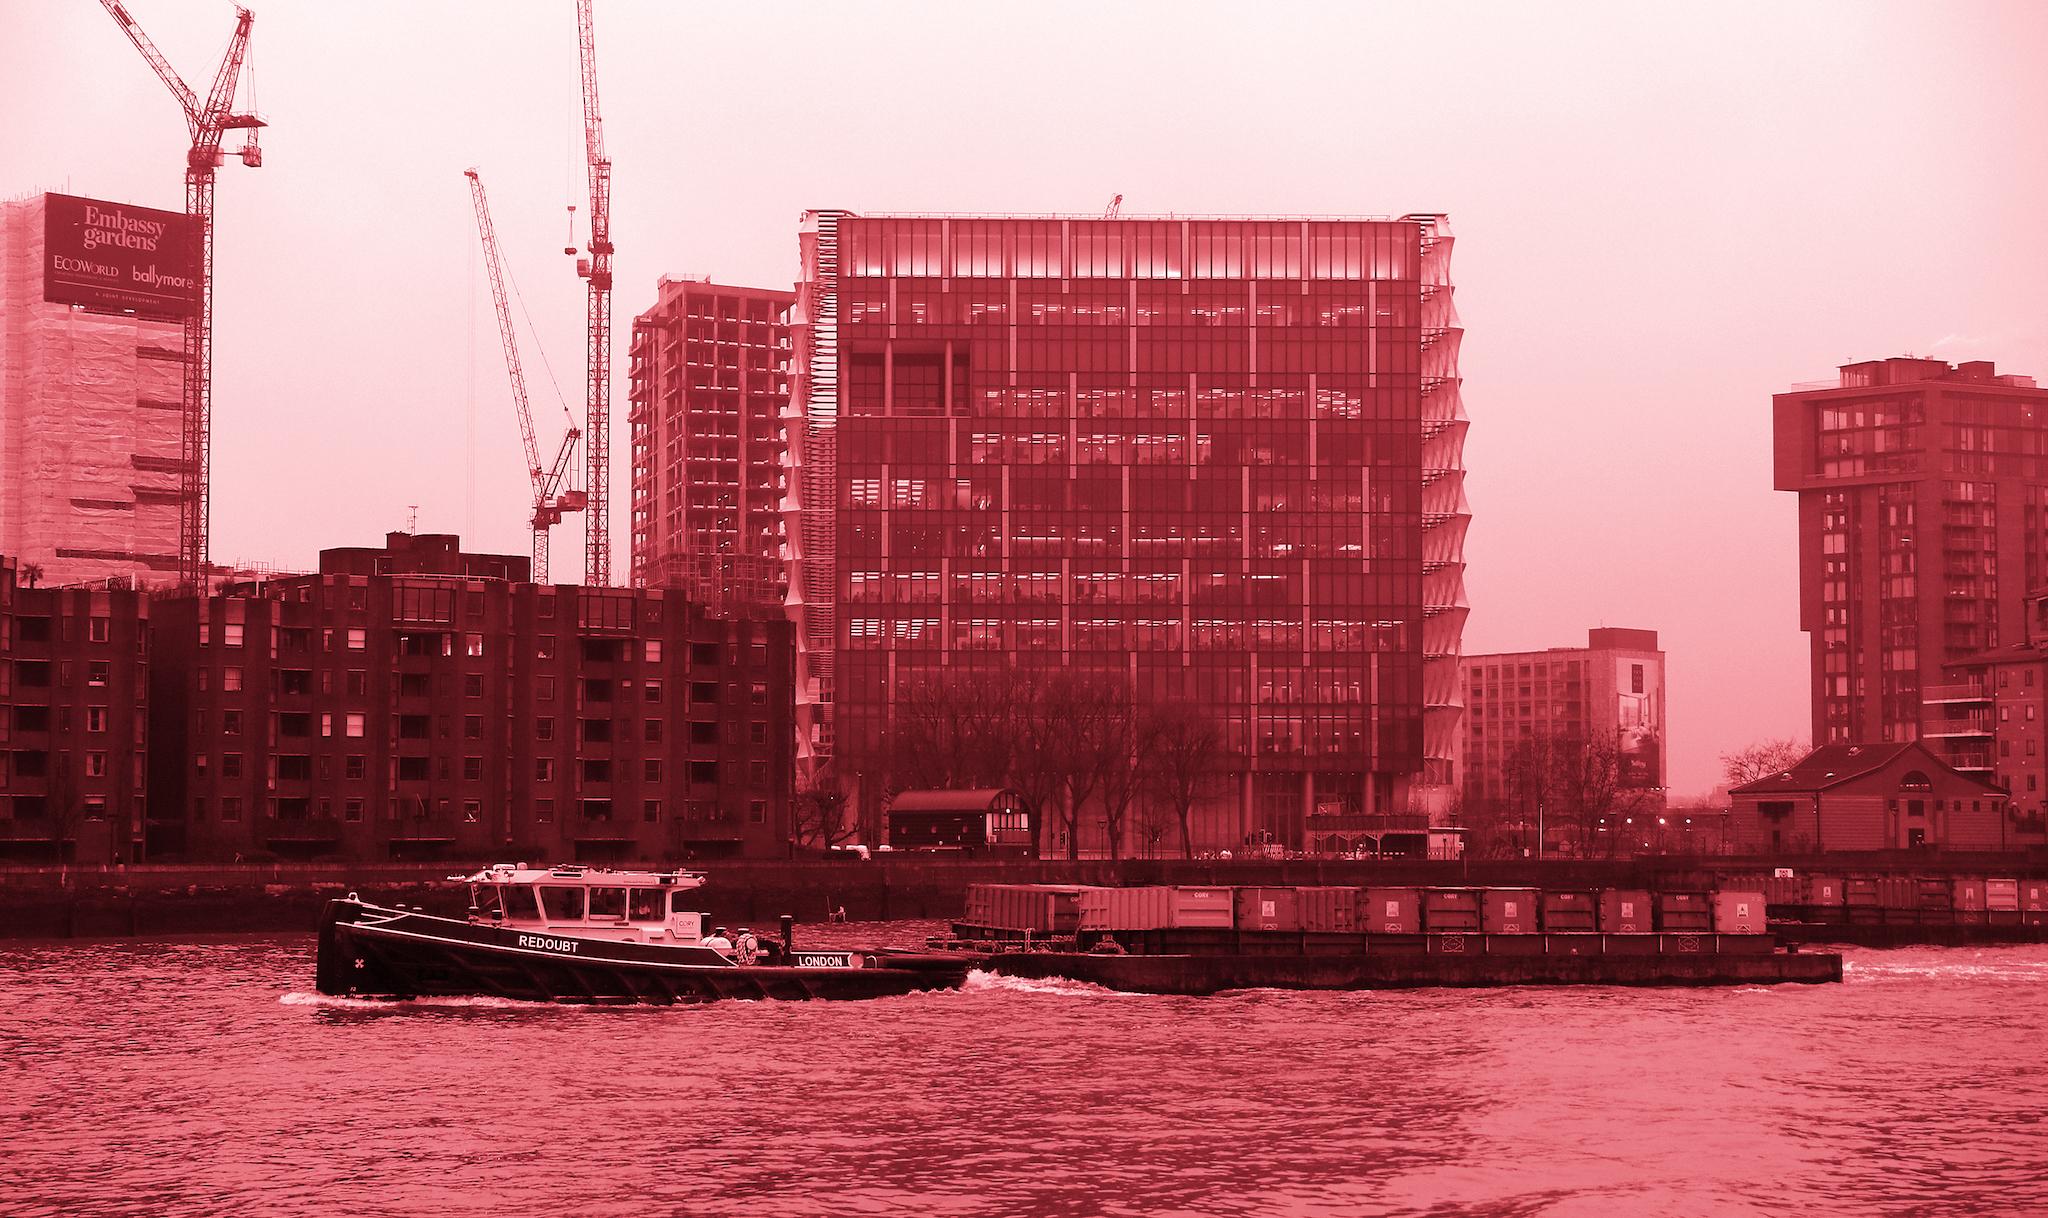 The newly built U.S. Embassy can be seen from across the River Thames in Nine Elms in London